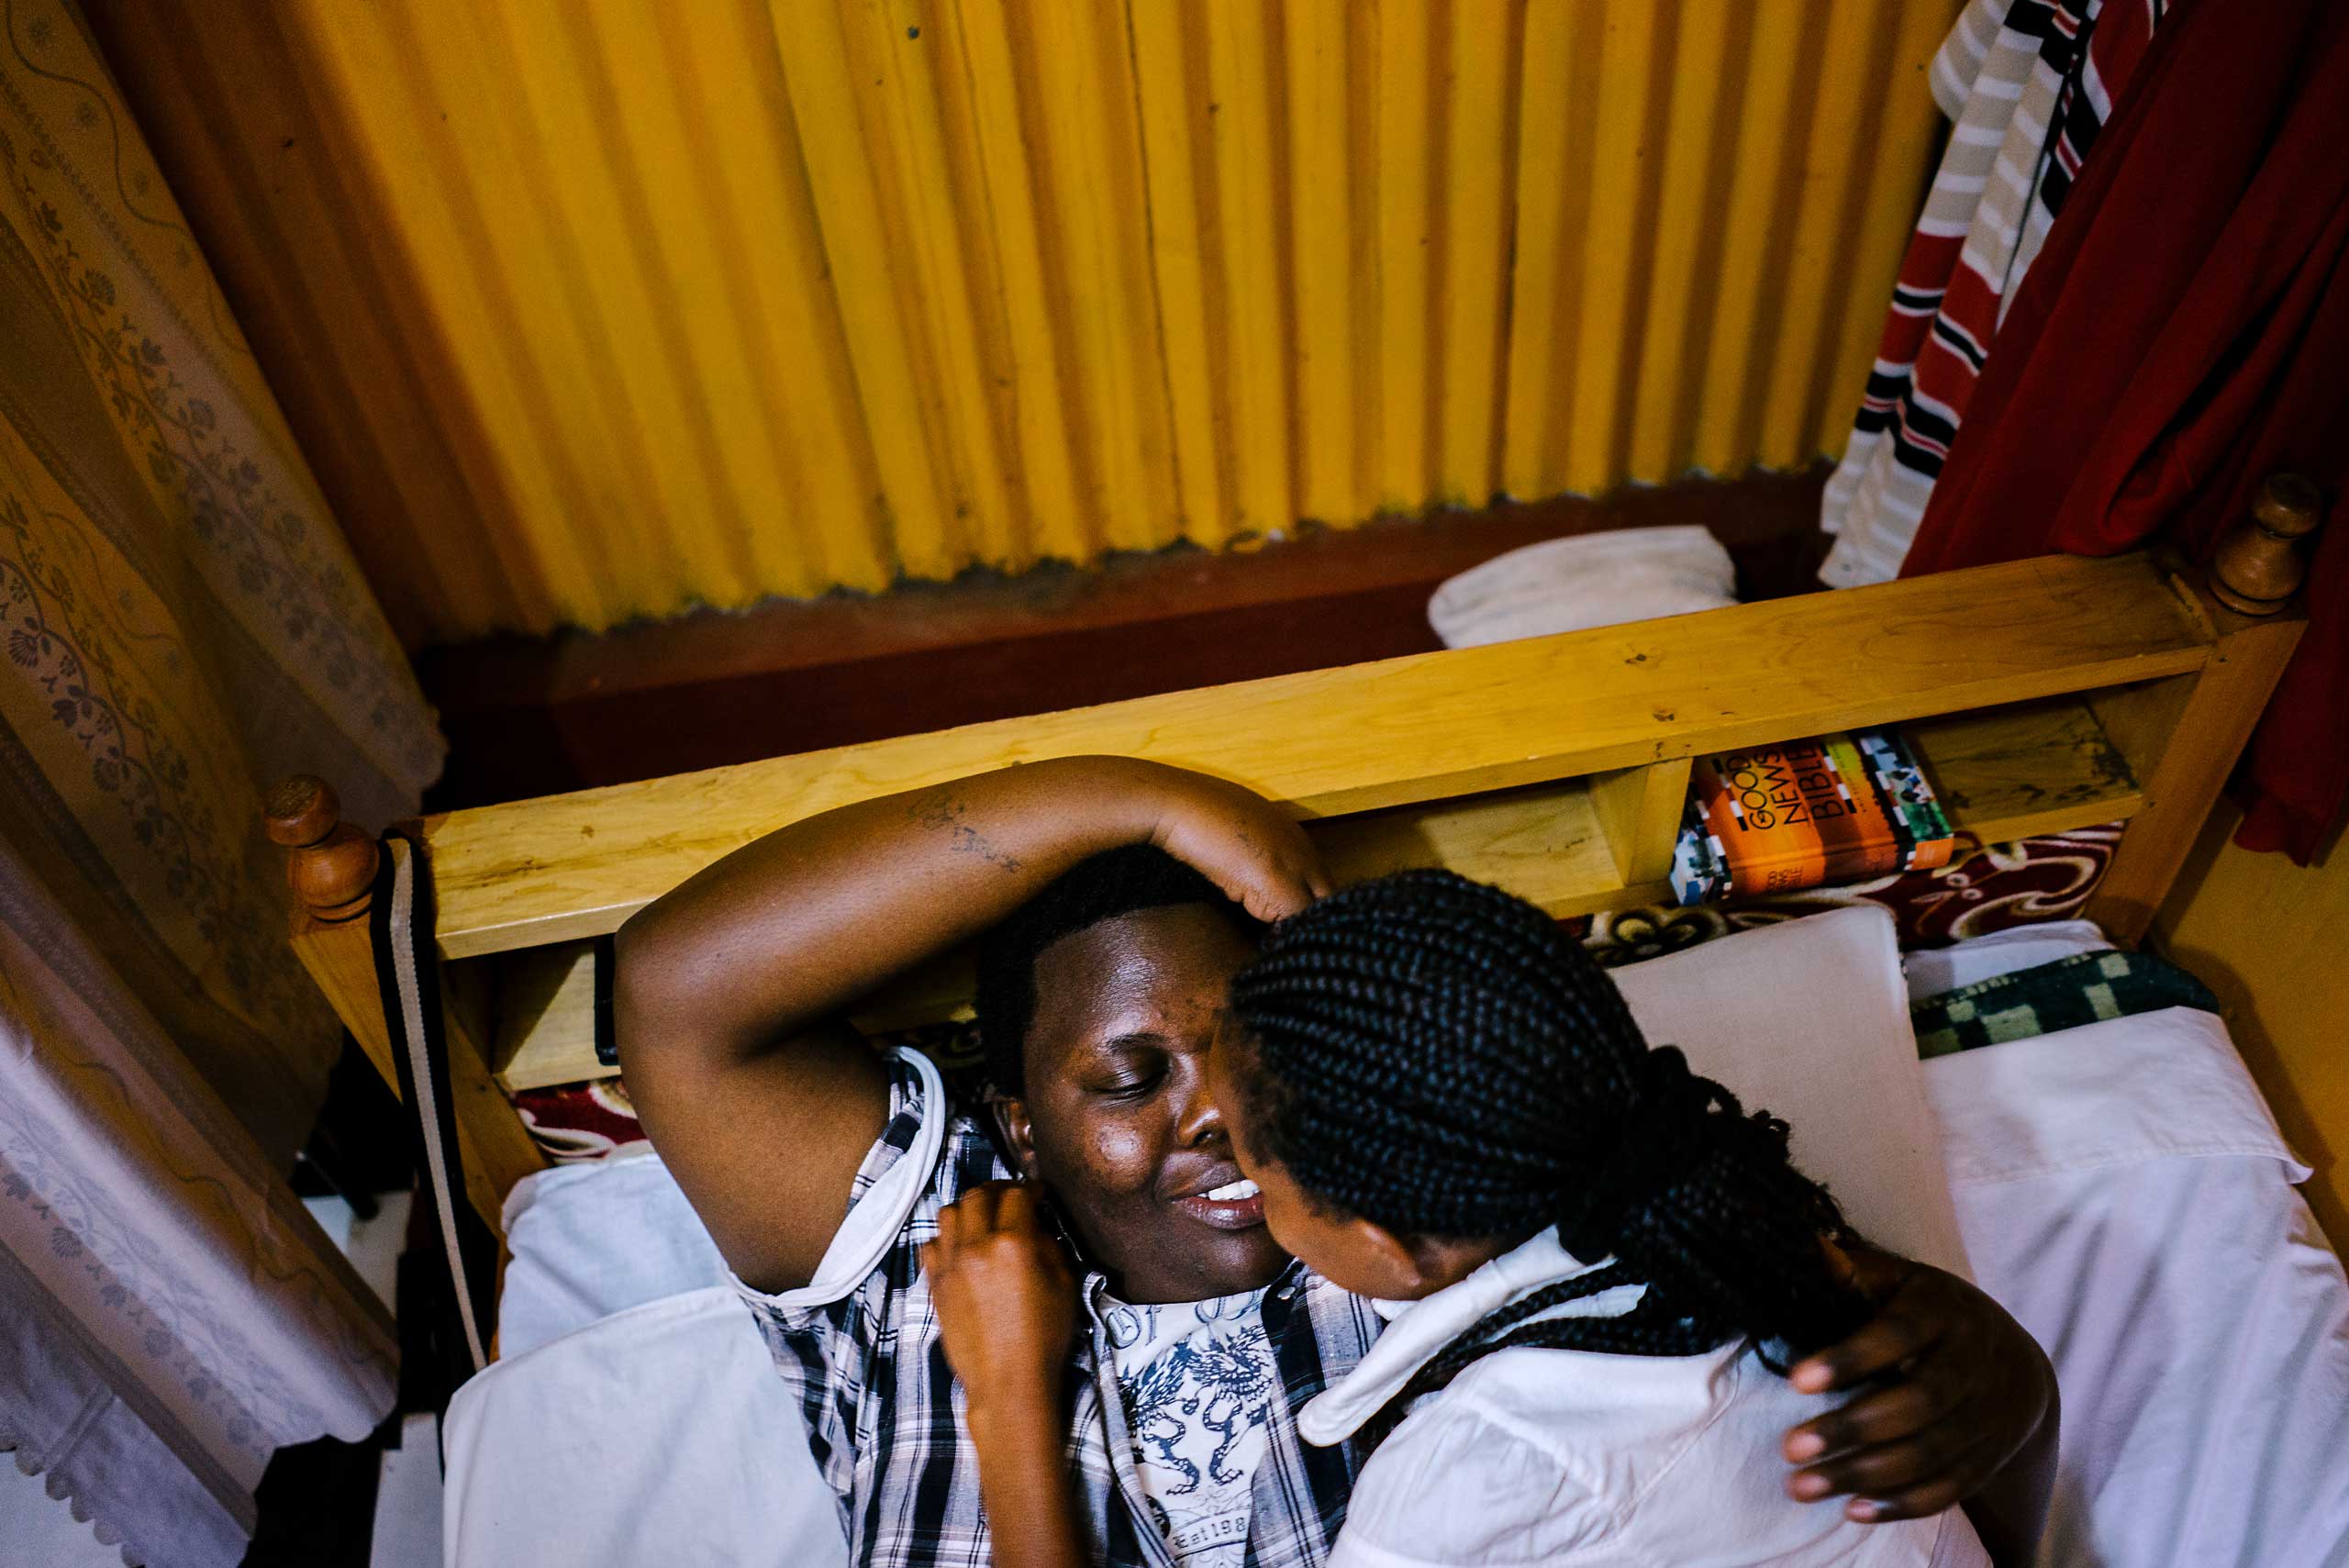 Cynthia is a lesbian activist and refugee from Burundi. She fled her country after authorities found out she was gay. She says she was beaten. Here, she lays in bed with her Kenyan girlfriend in the apartment the two shared in Nairobi, Kenya (though they have since moved). Cynthia is due to be resettled in the U.S. any day now, though that has been the case for months.